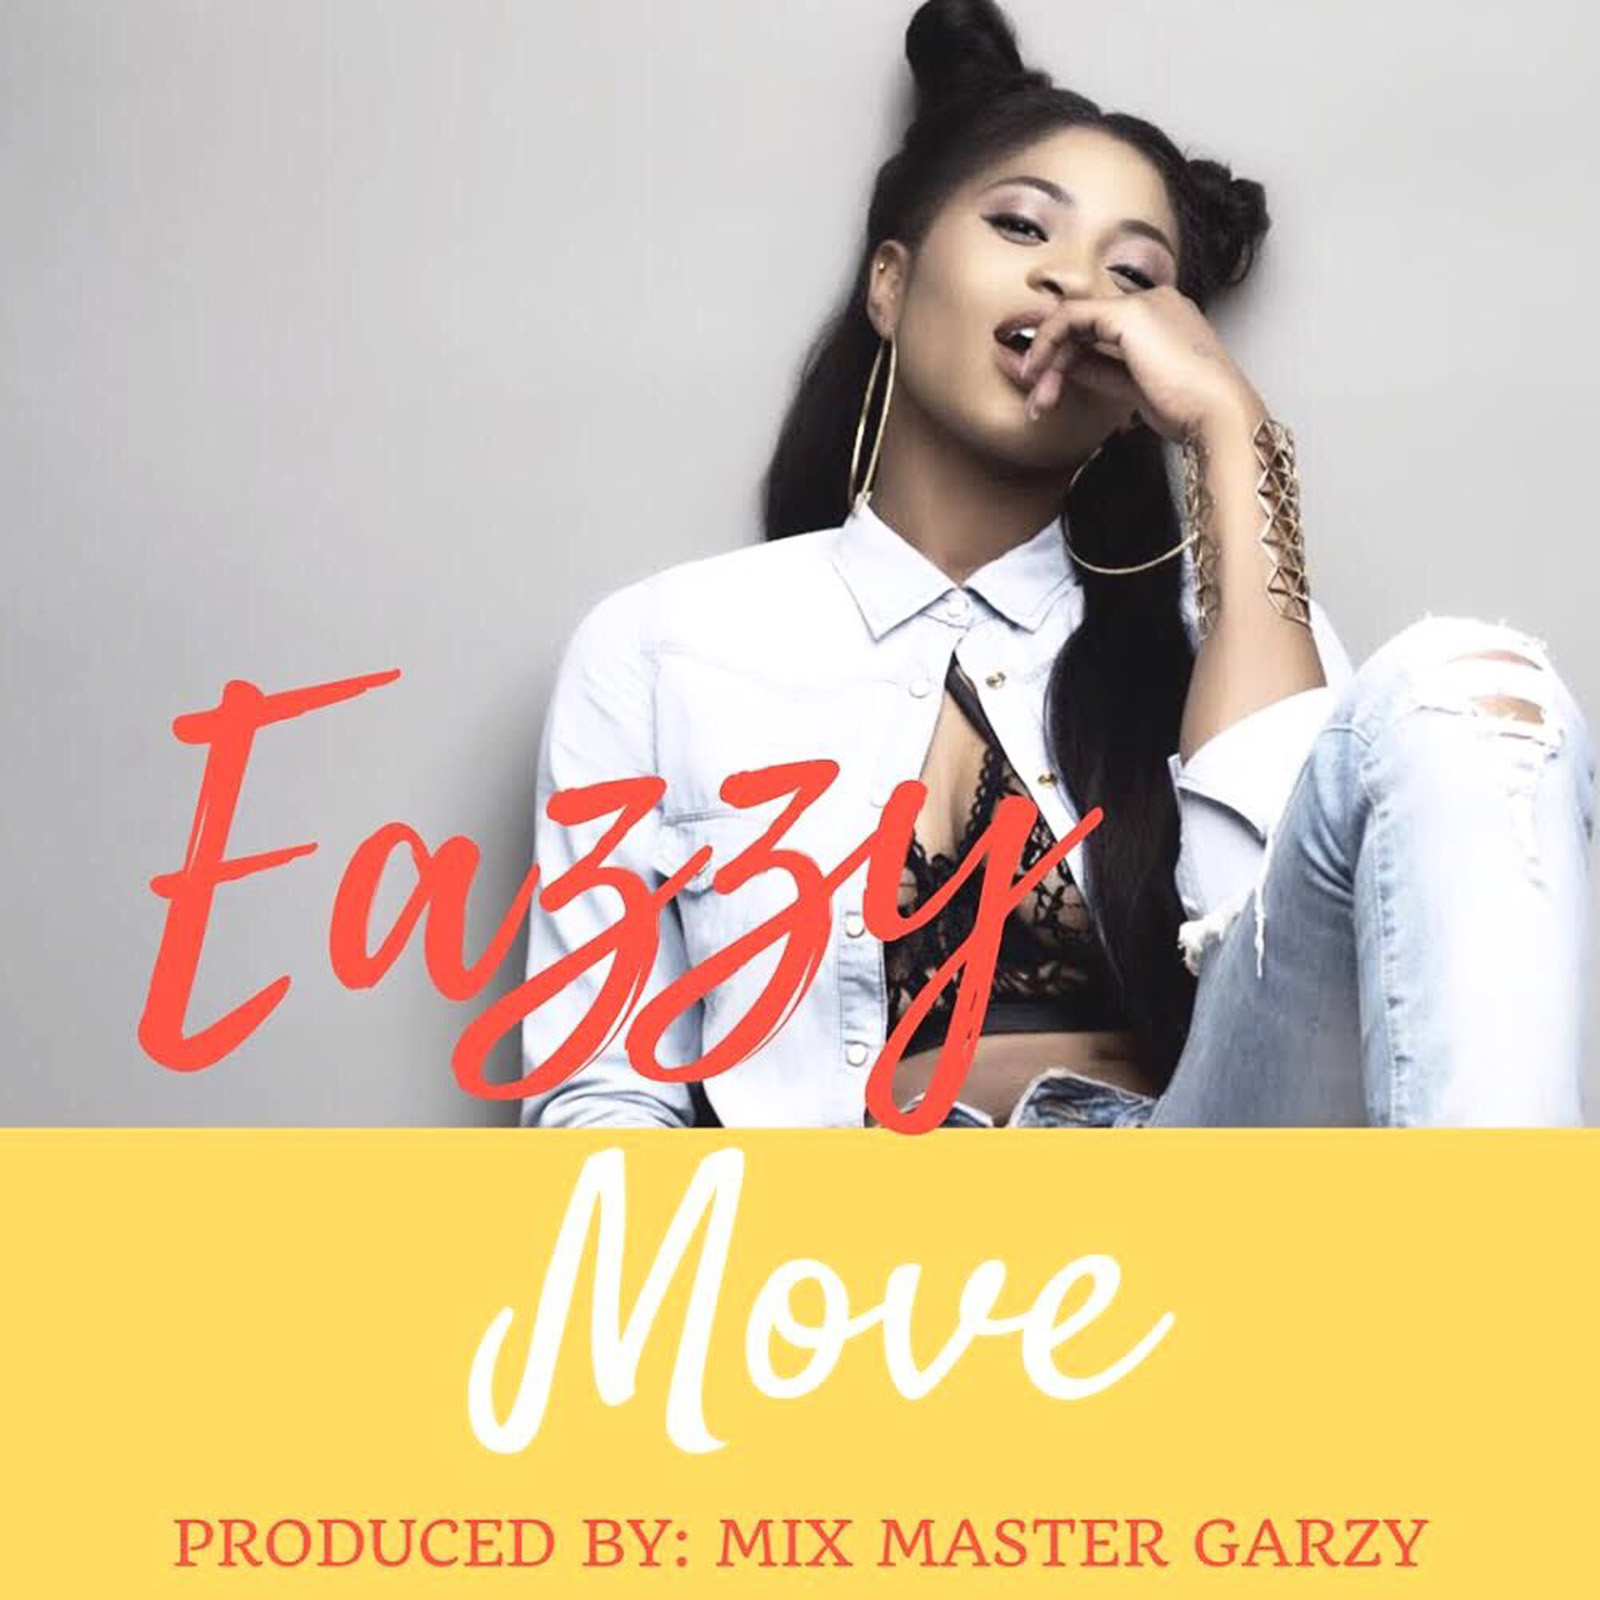 Move by Eazzy